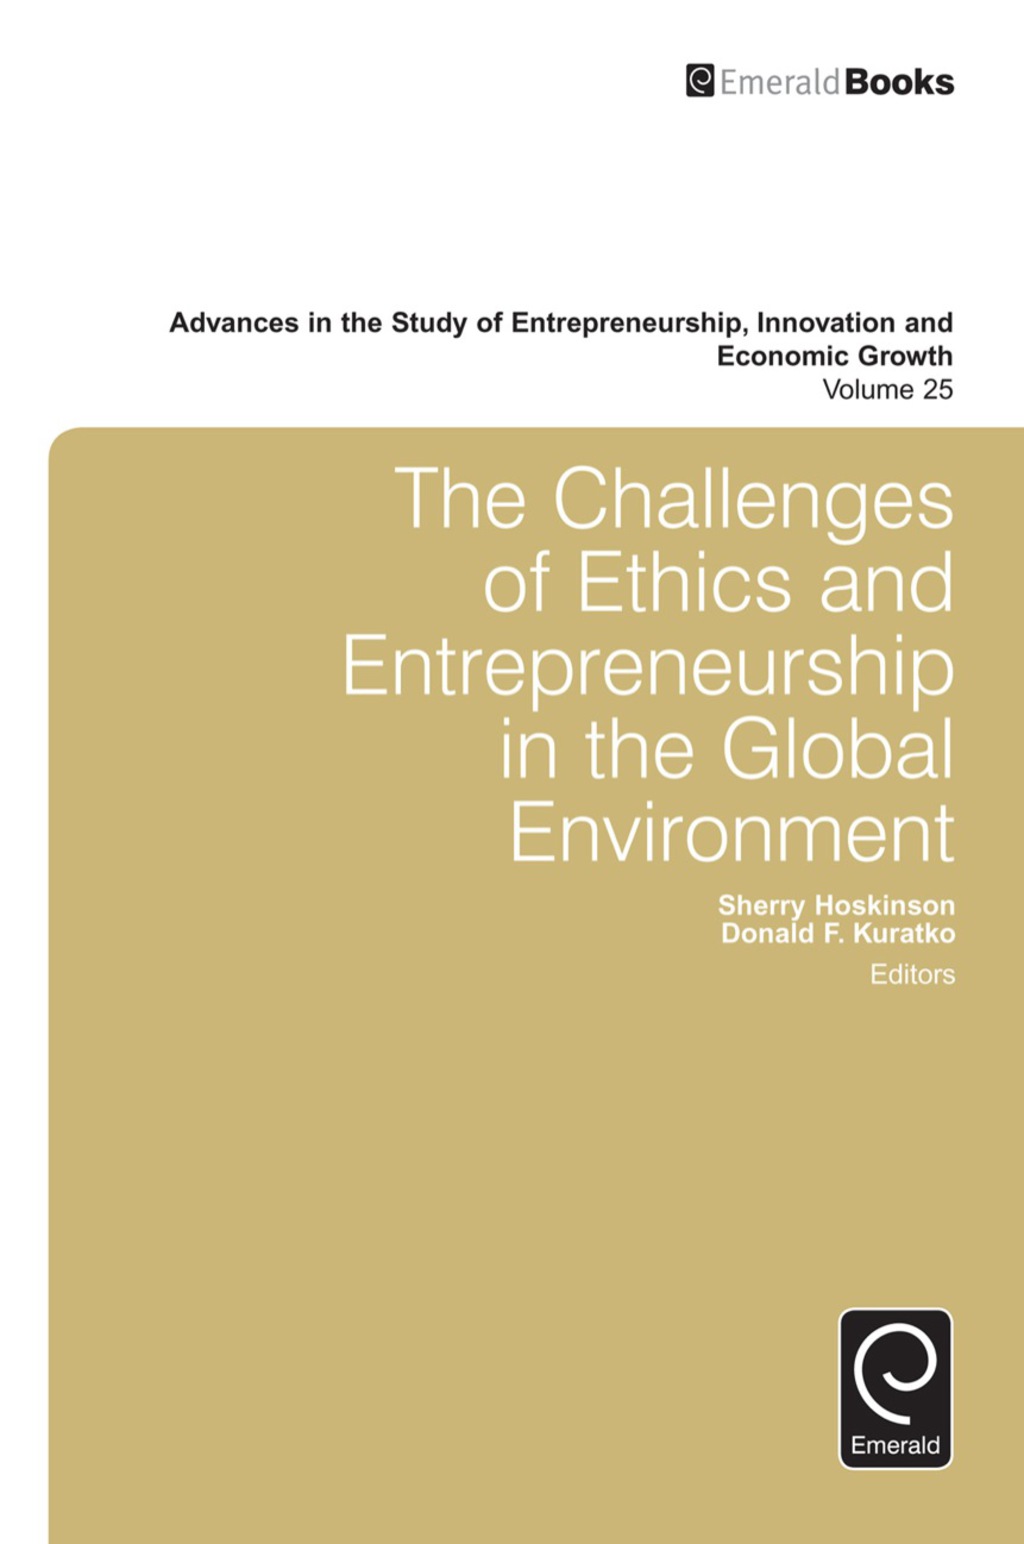 The Challenges of Ethics and Entrepreneurship in the Global Environment (eBook) - Sherry Hoskinson